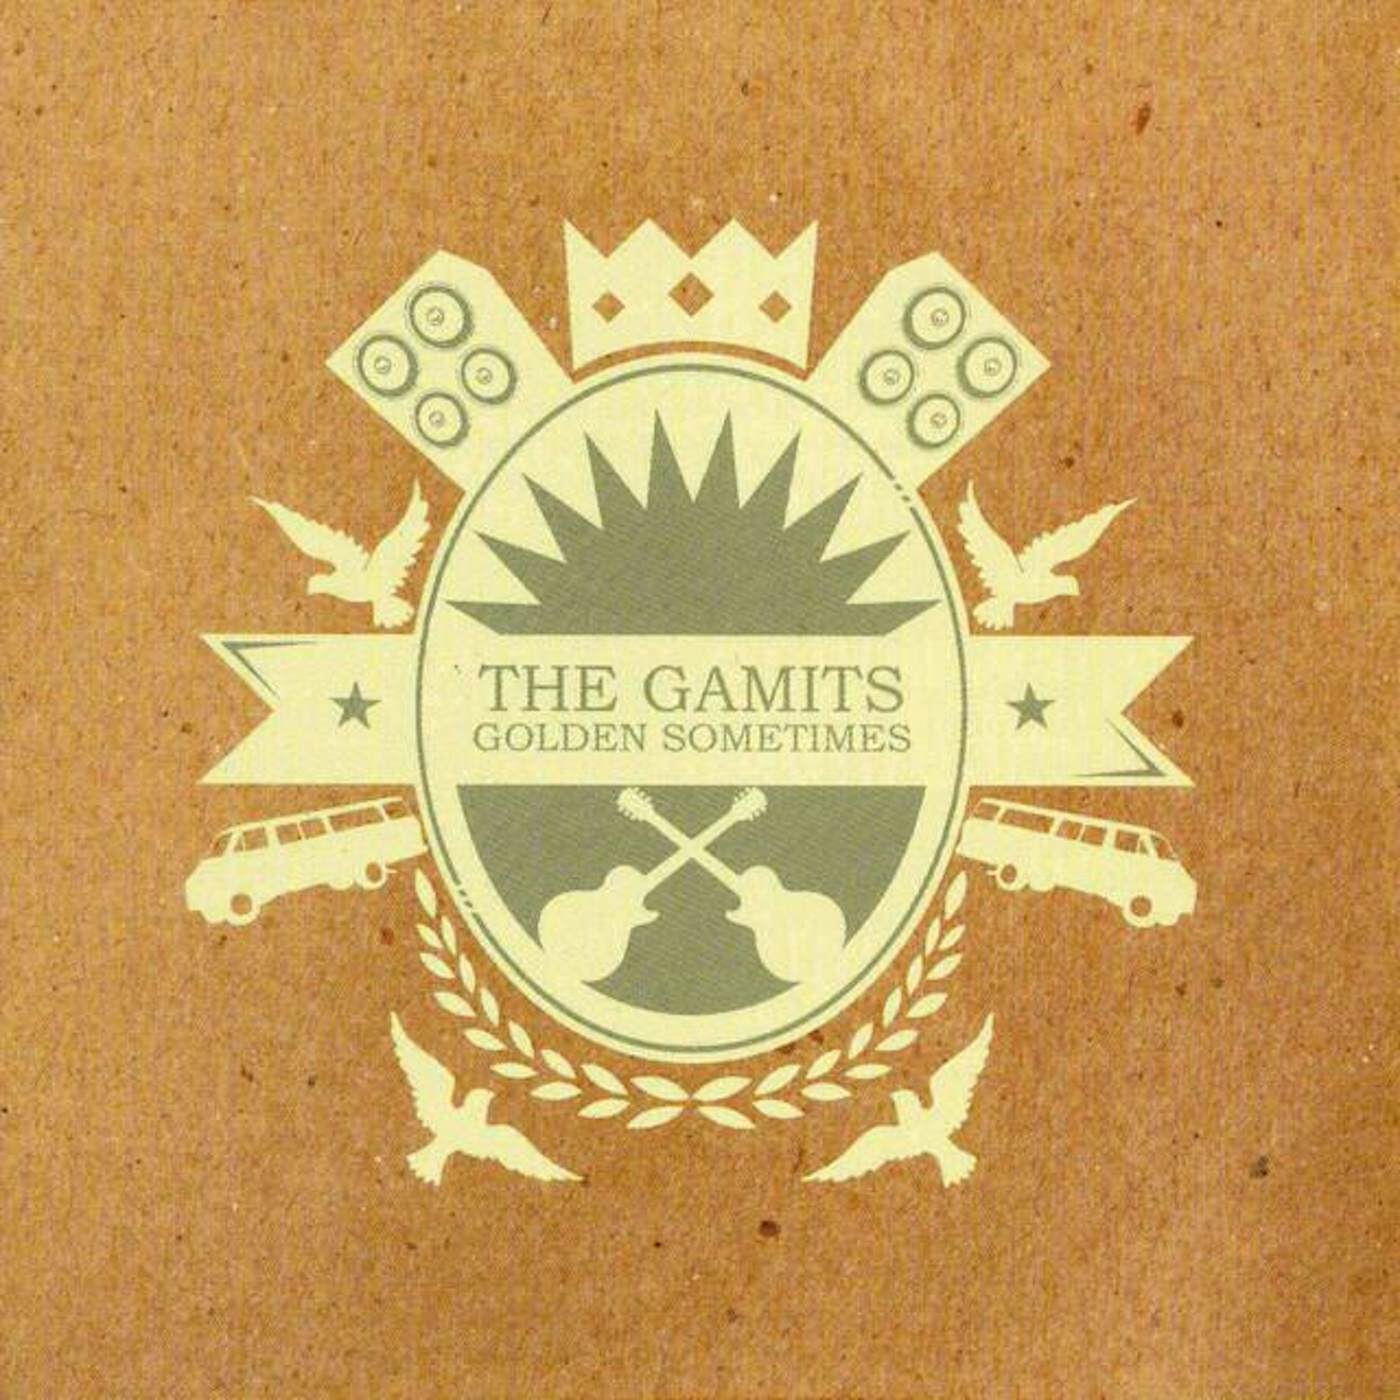 The Gamits